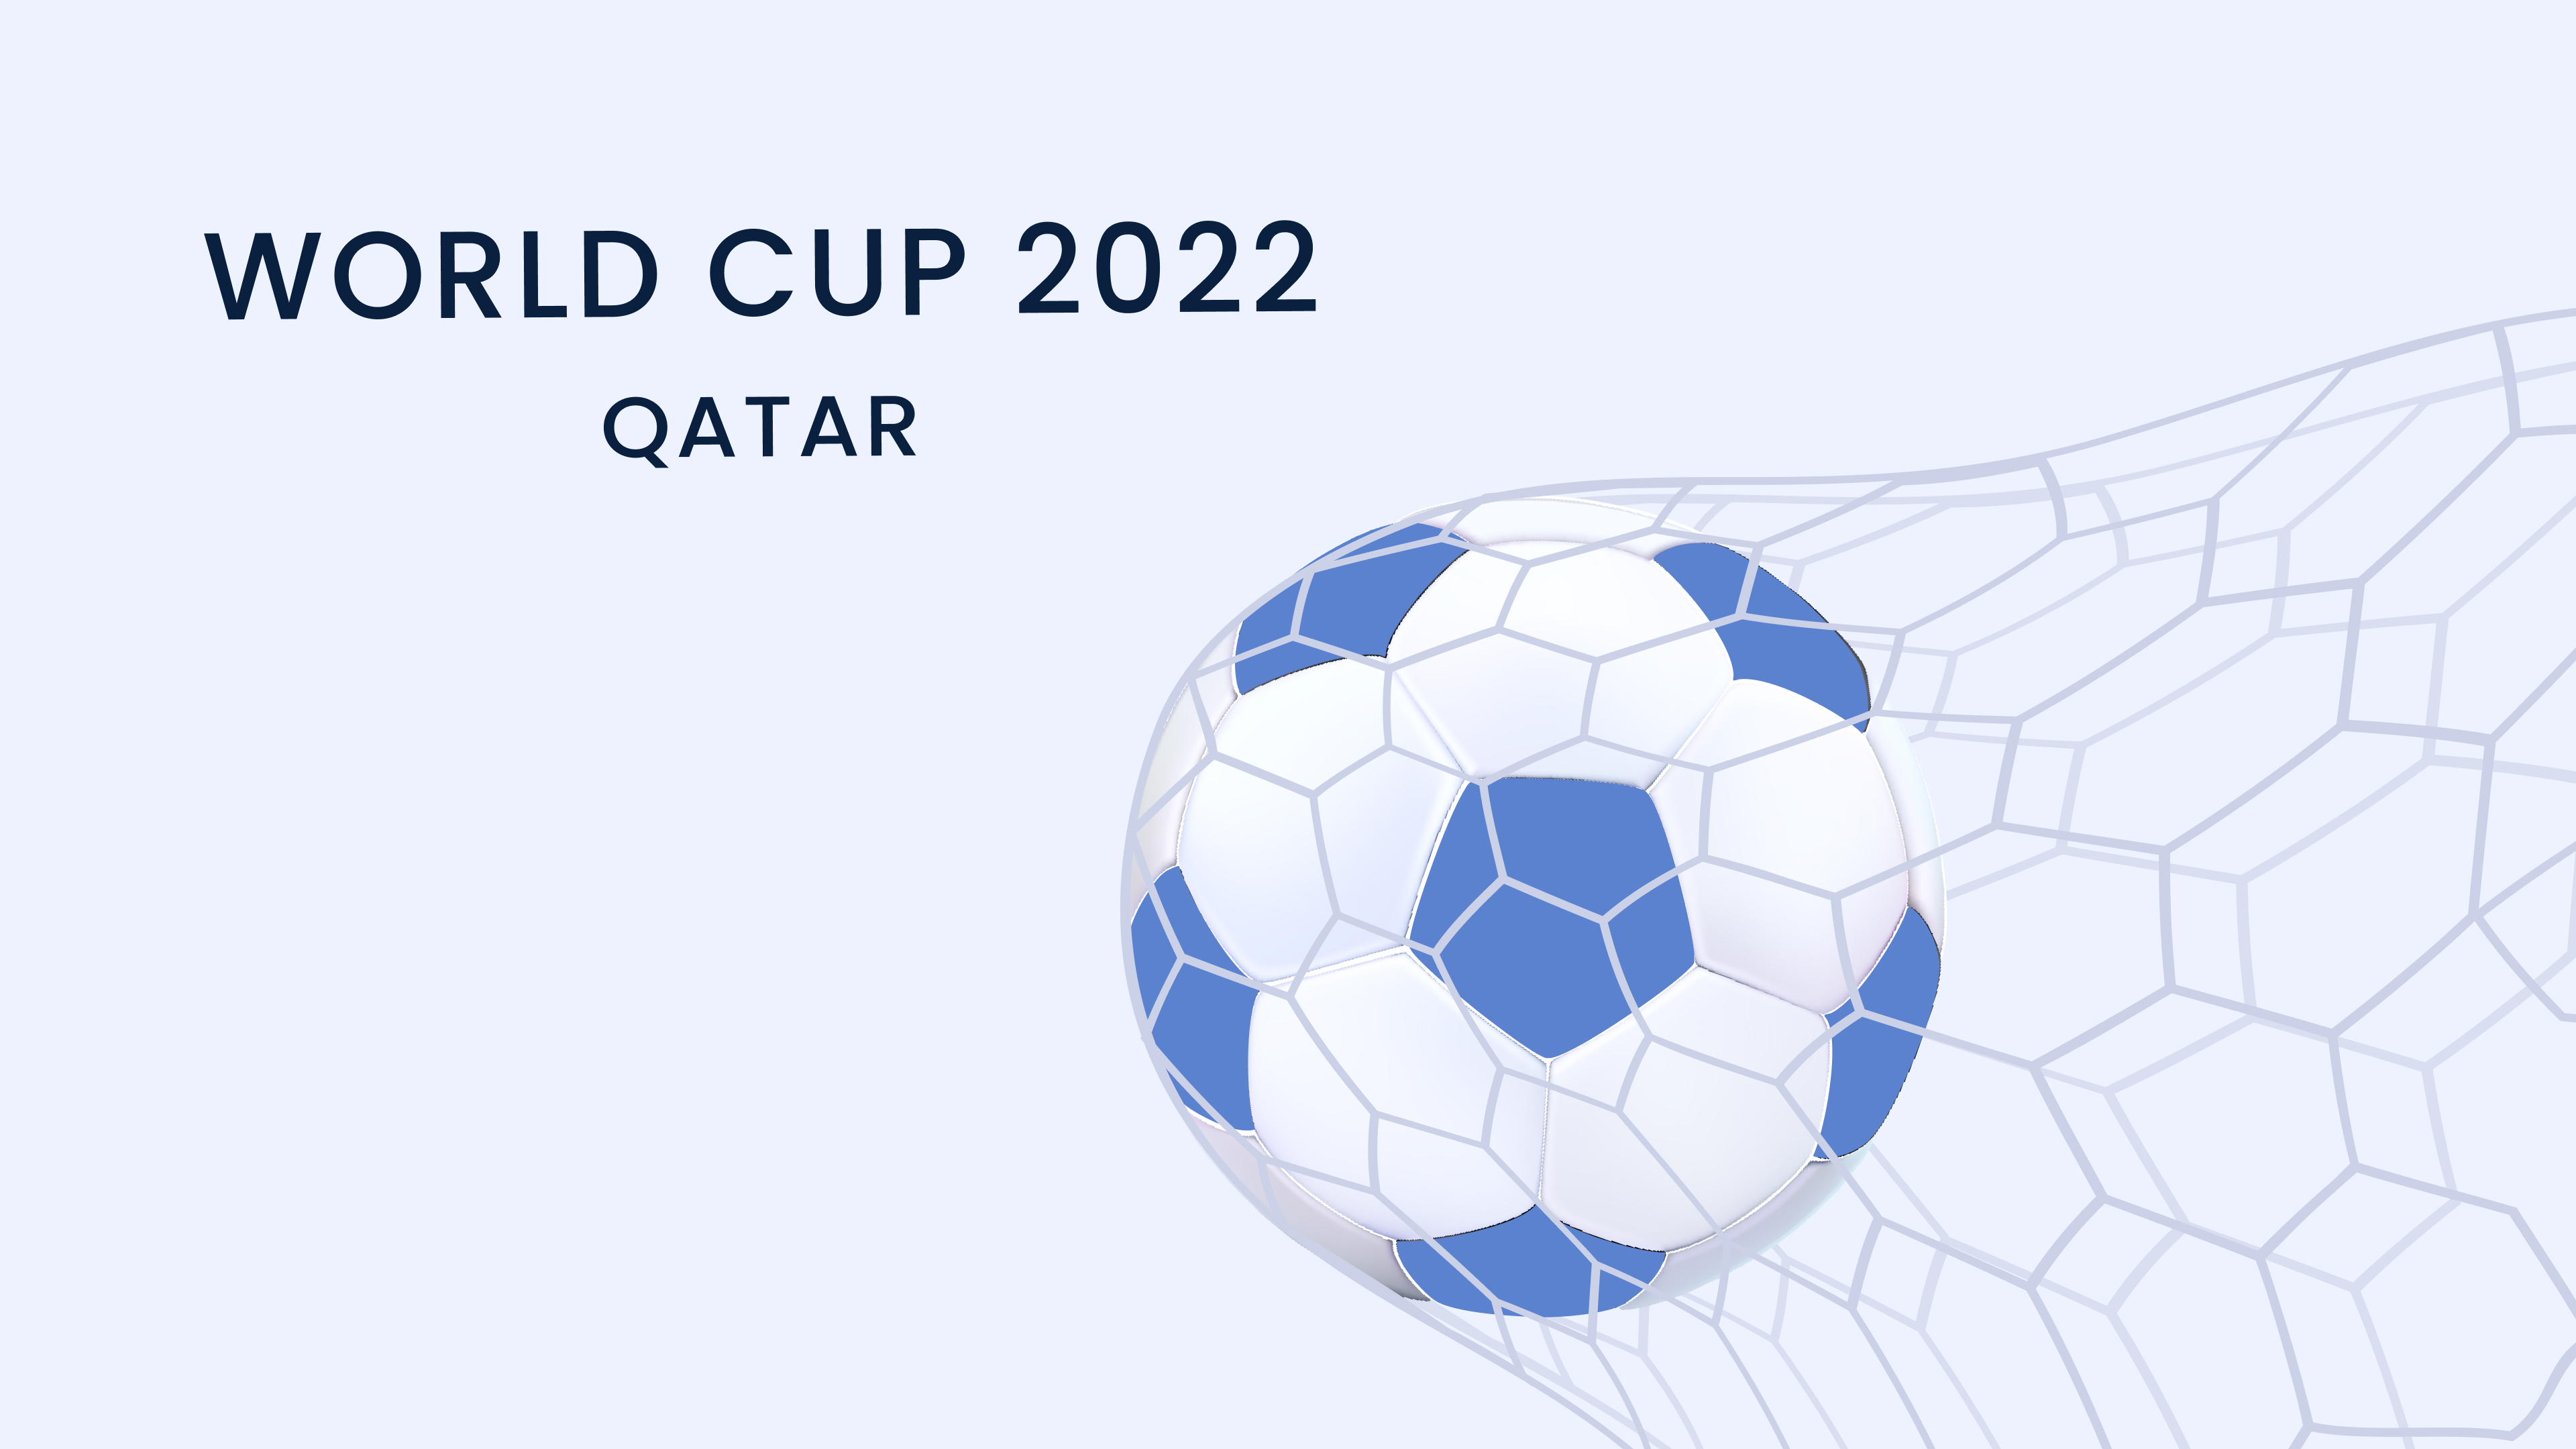 Lesson from Qatar World Cup 2022 